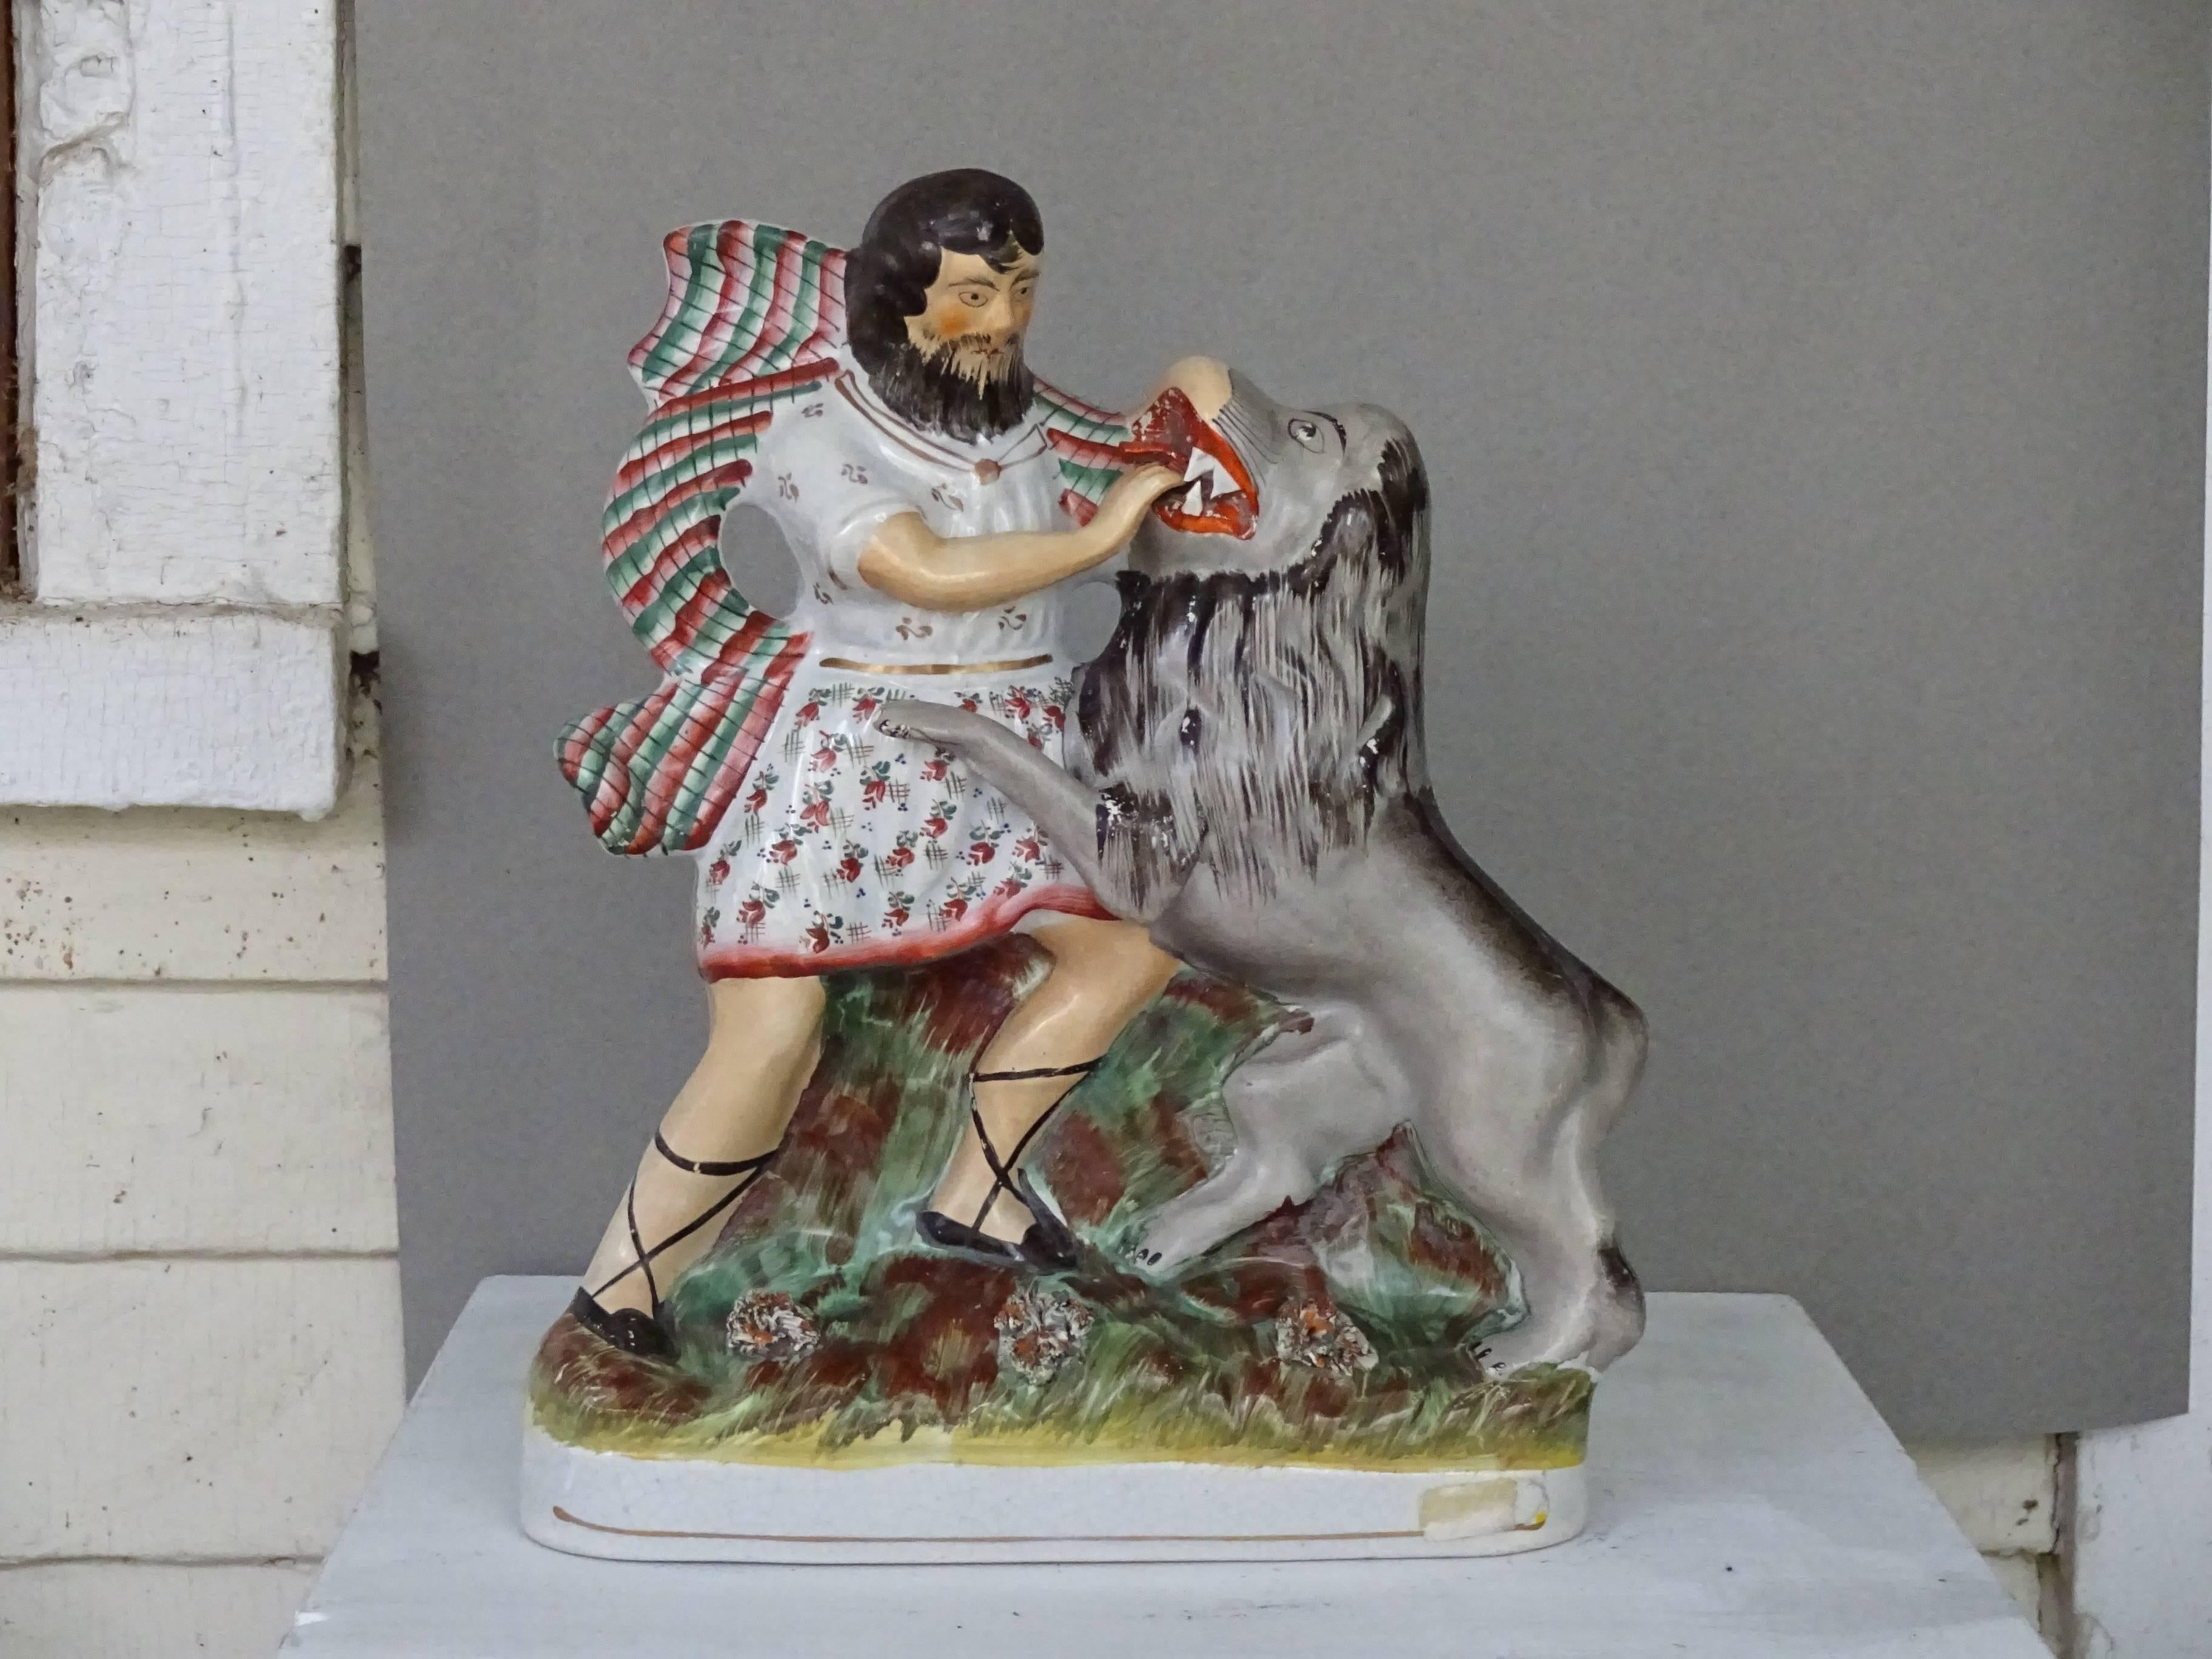 19th century Staffordshire figure of Hercules battling the Nemean lion. Hercules
attempting to strangle the beast, his hands in the beast's toothy mouth. Wonderful cloak thrown over his shoulder. On a porcelain marbleized base.